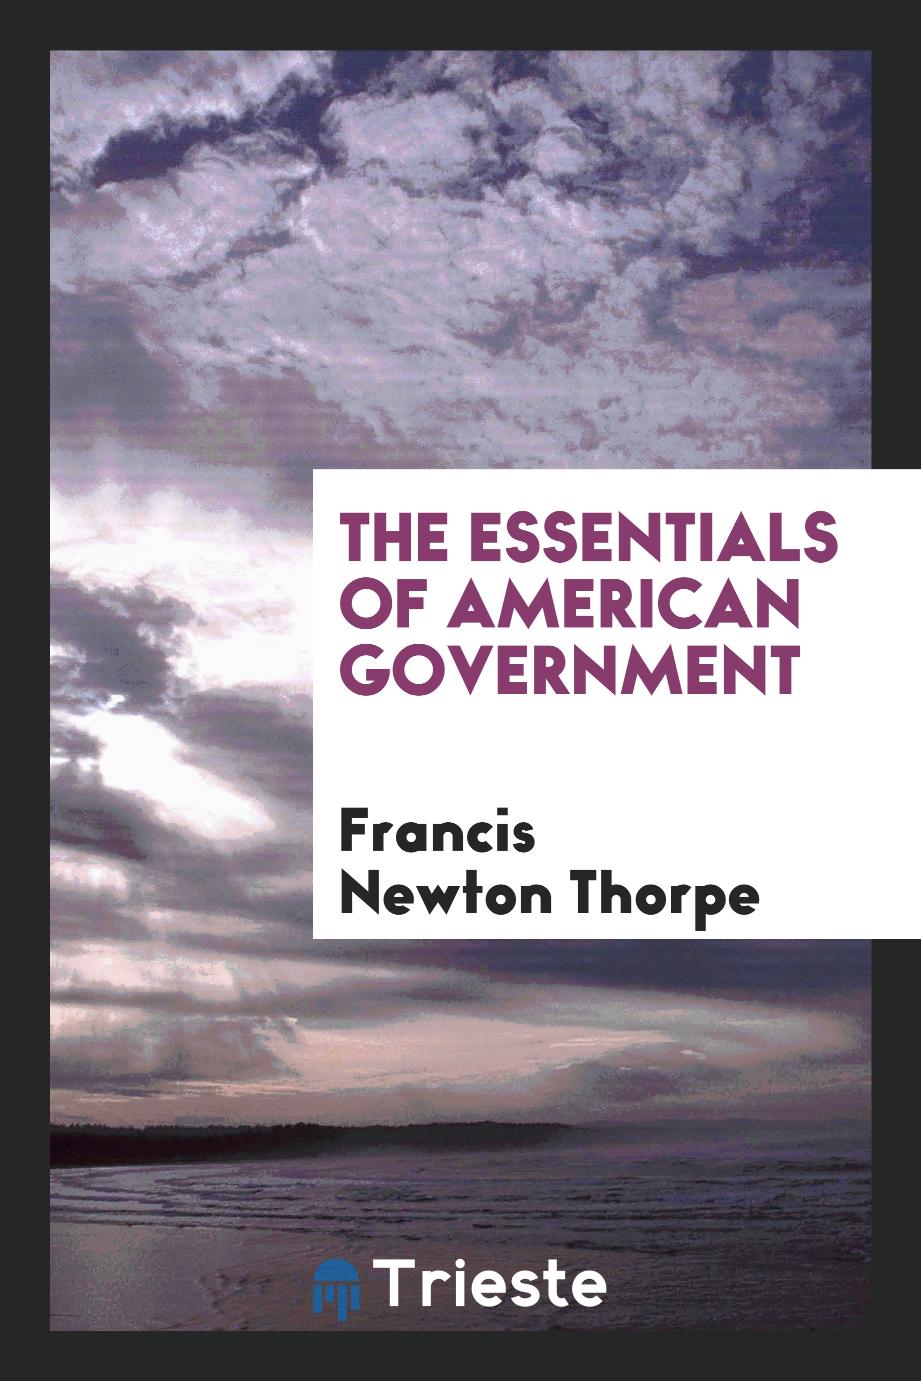 The essentials of American government